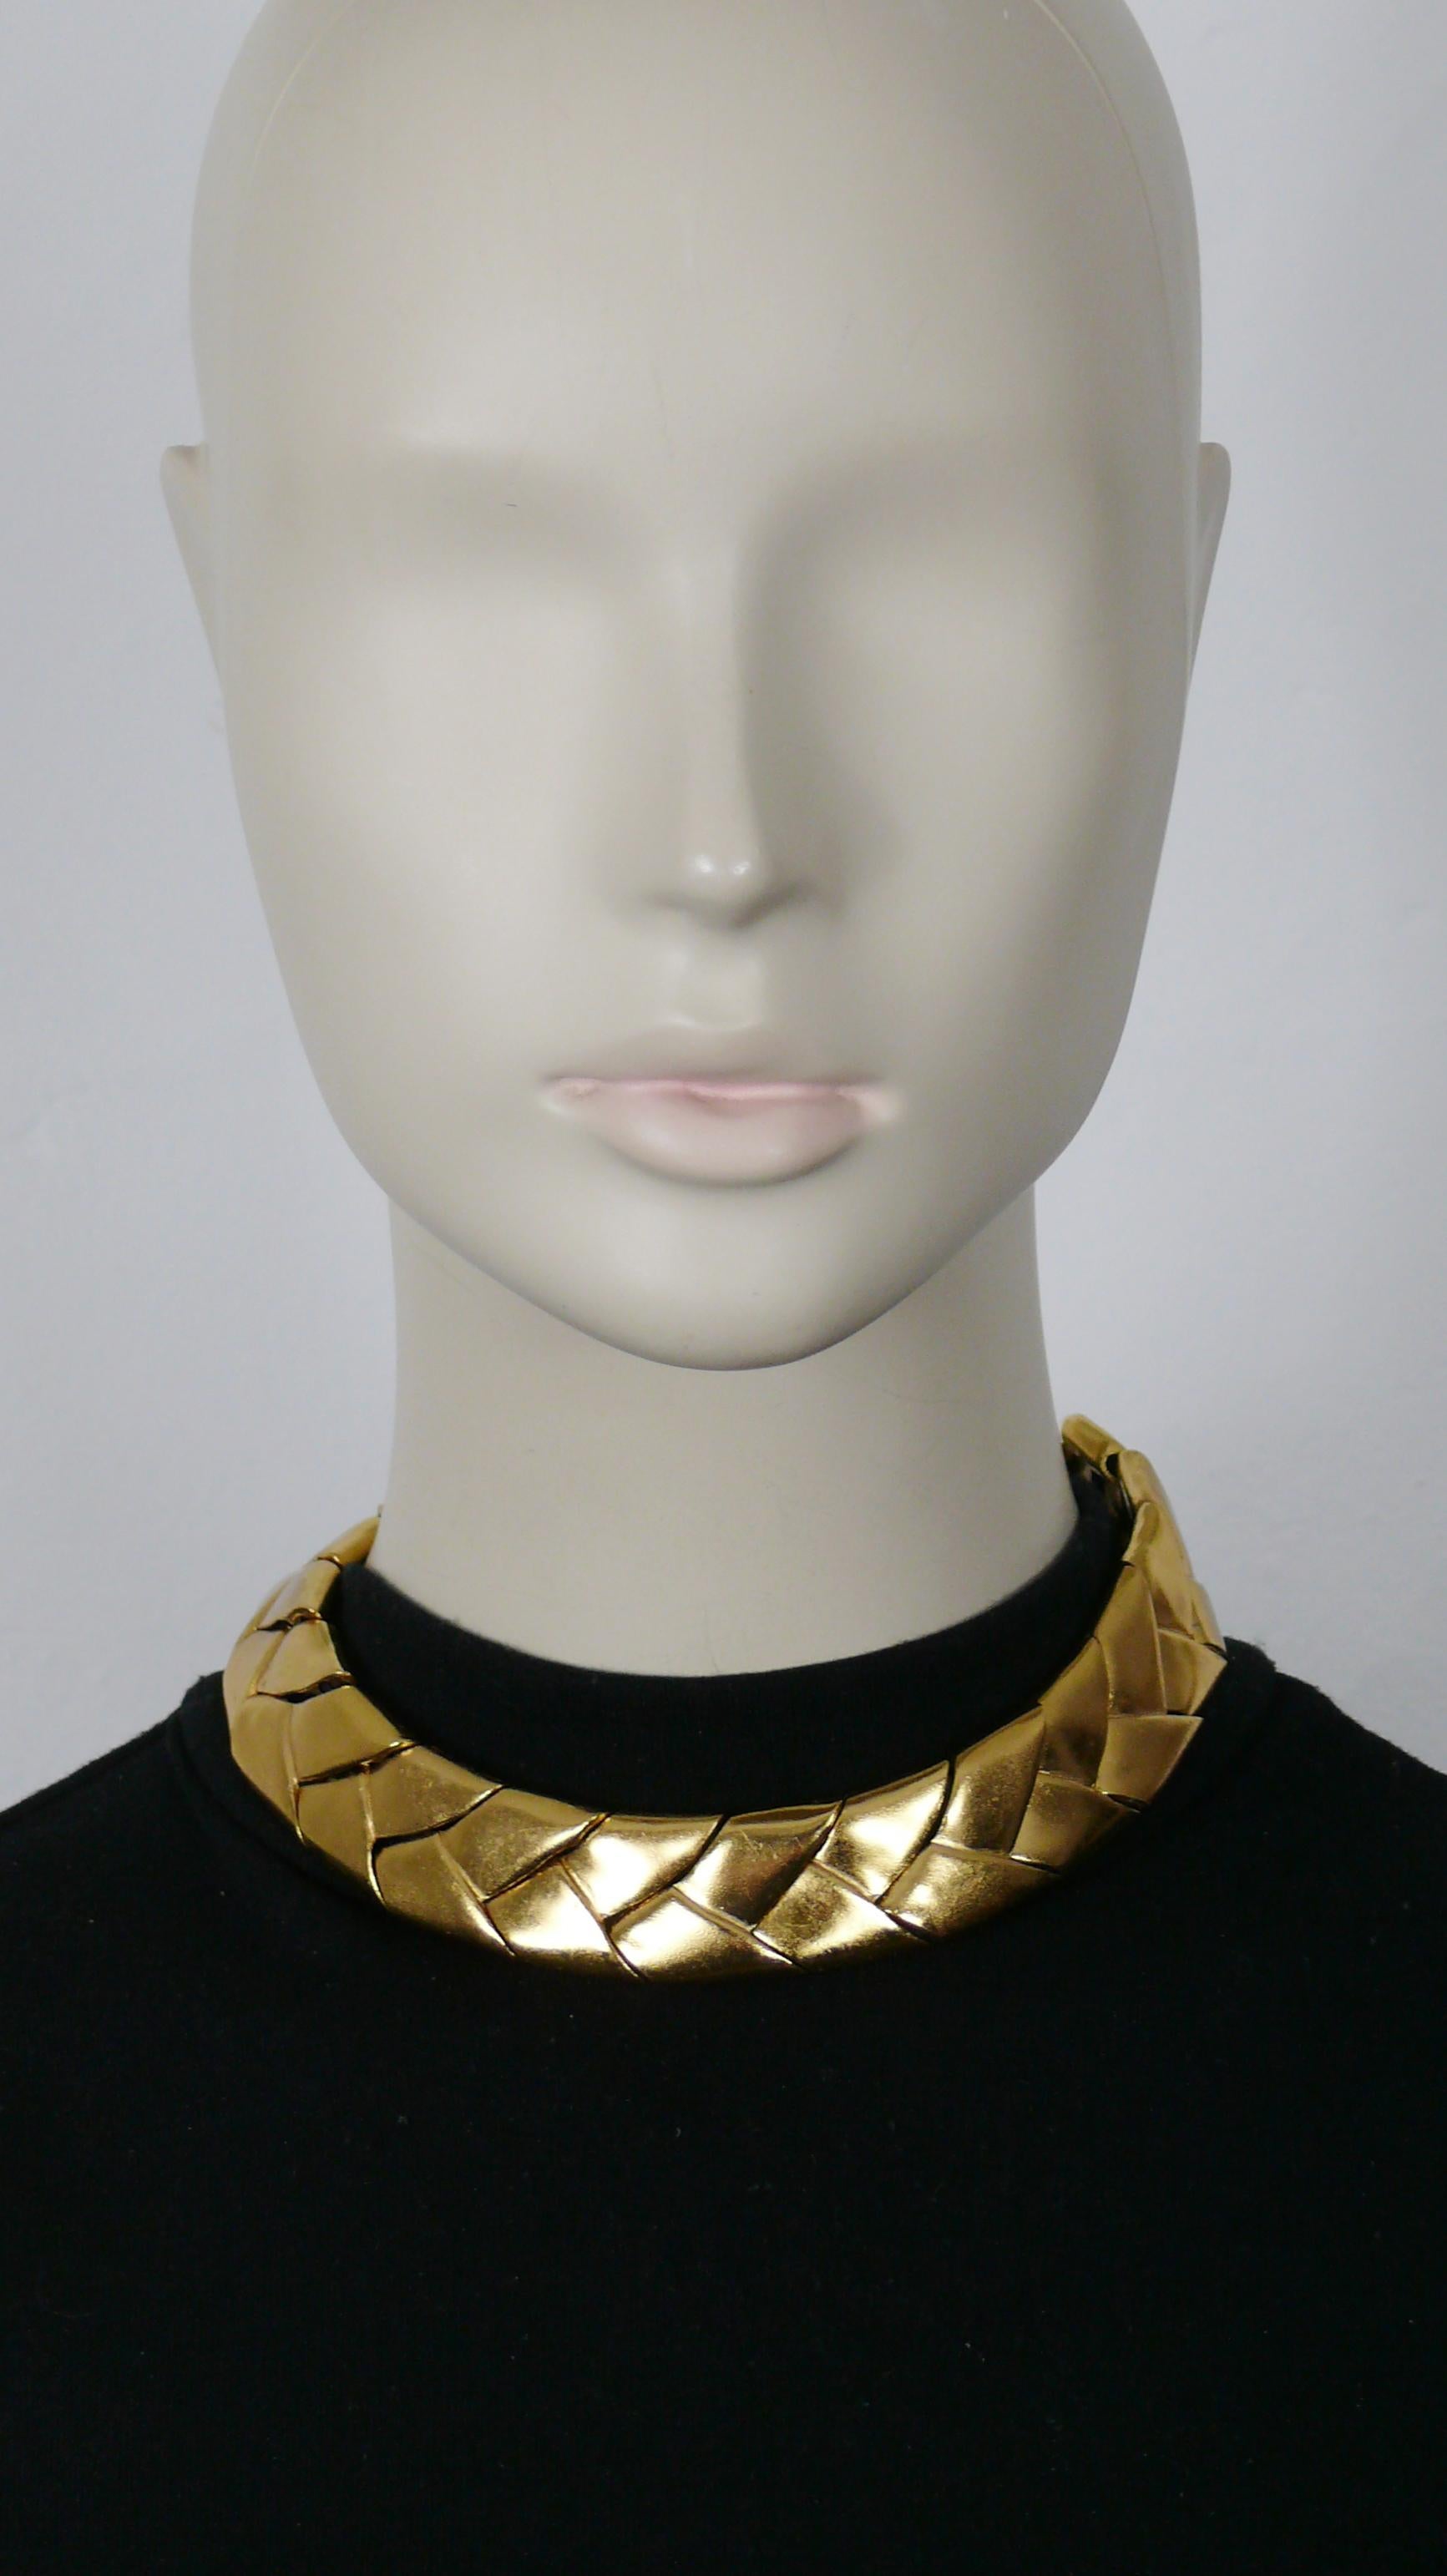 YVES SAINT LAURENT Rive Gauche vintage gold tone braided necklace.

T-bar and toggle closure.

Embossed YVES SAINT LAURENT Rive Gauche Made in France.

Indicative measurements : min. circumference approx. 39.27 cm (15.46 inches) / max. circumference